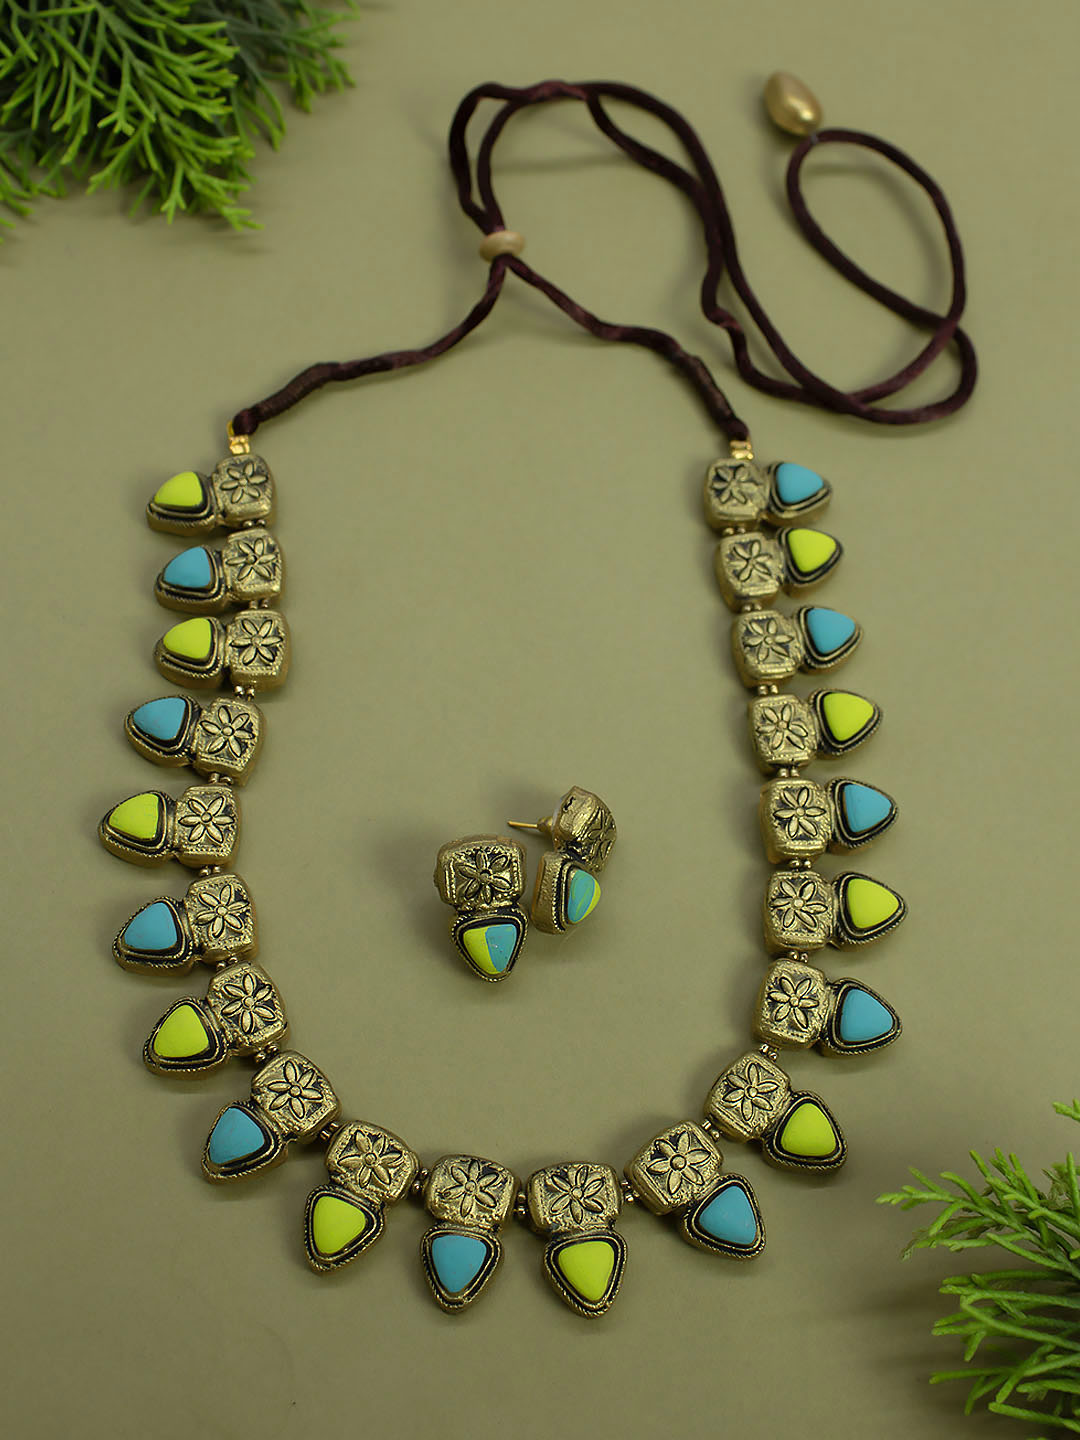 Turquoise Heishi Necklace - Native American Jewelry by Artist Unknown